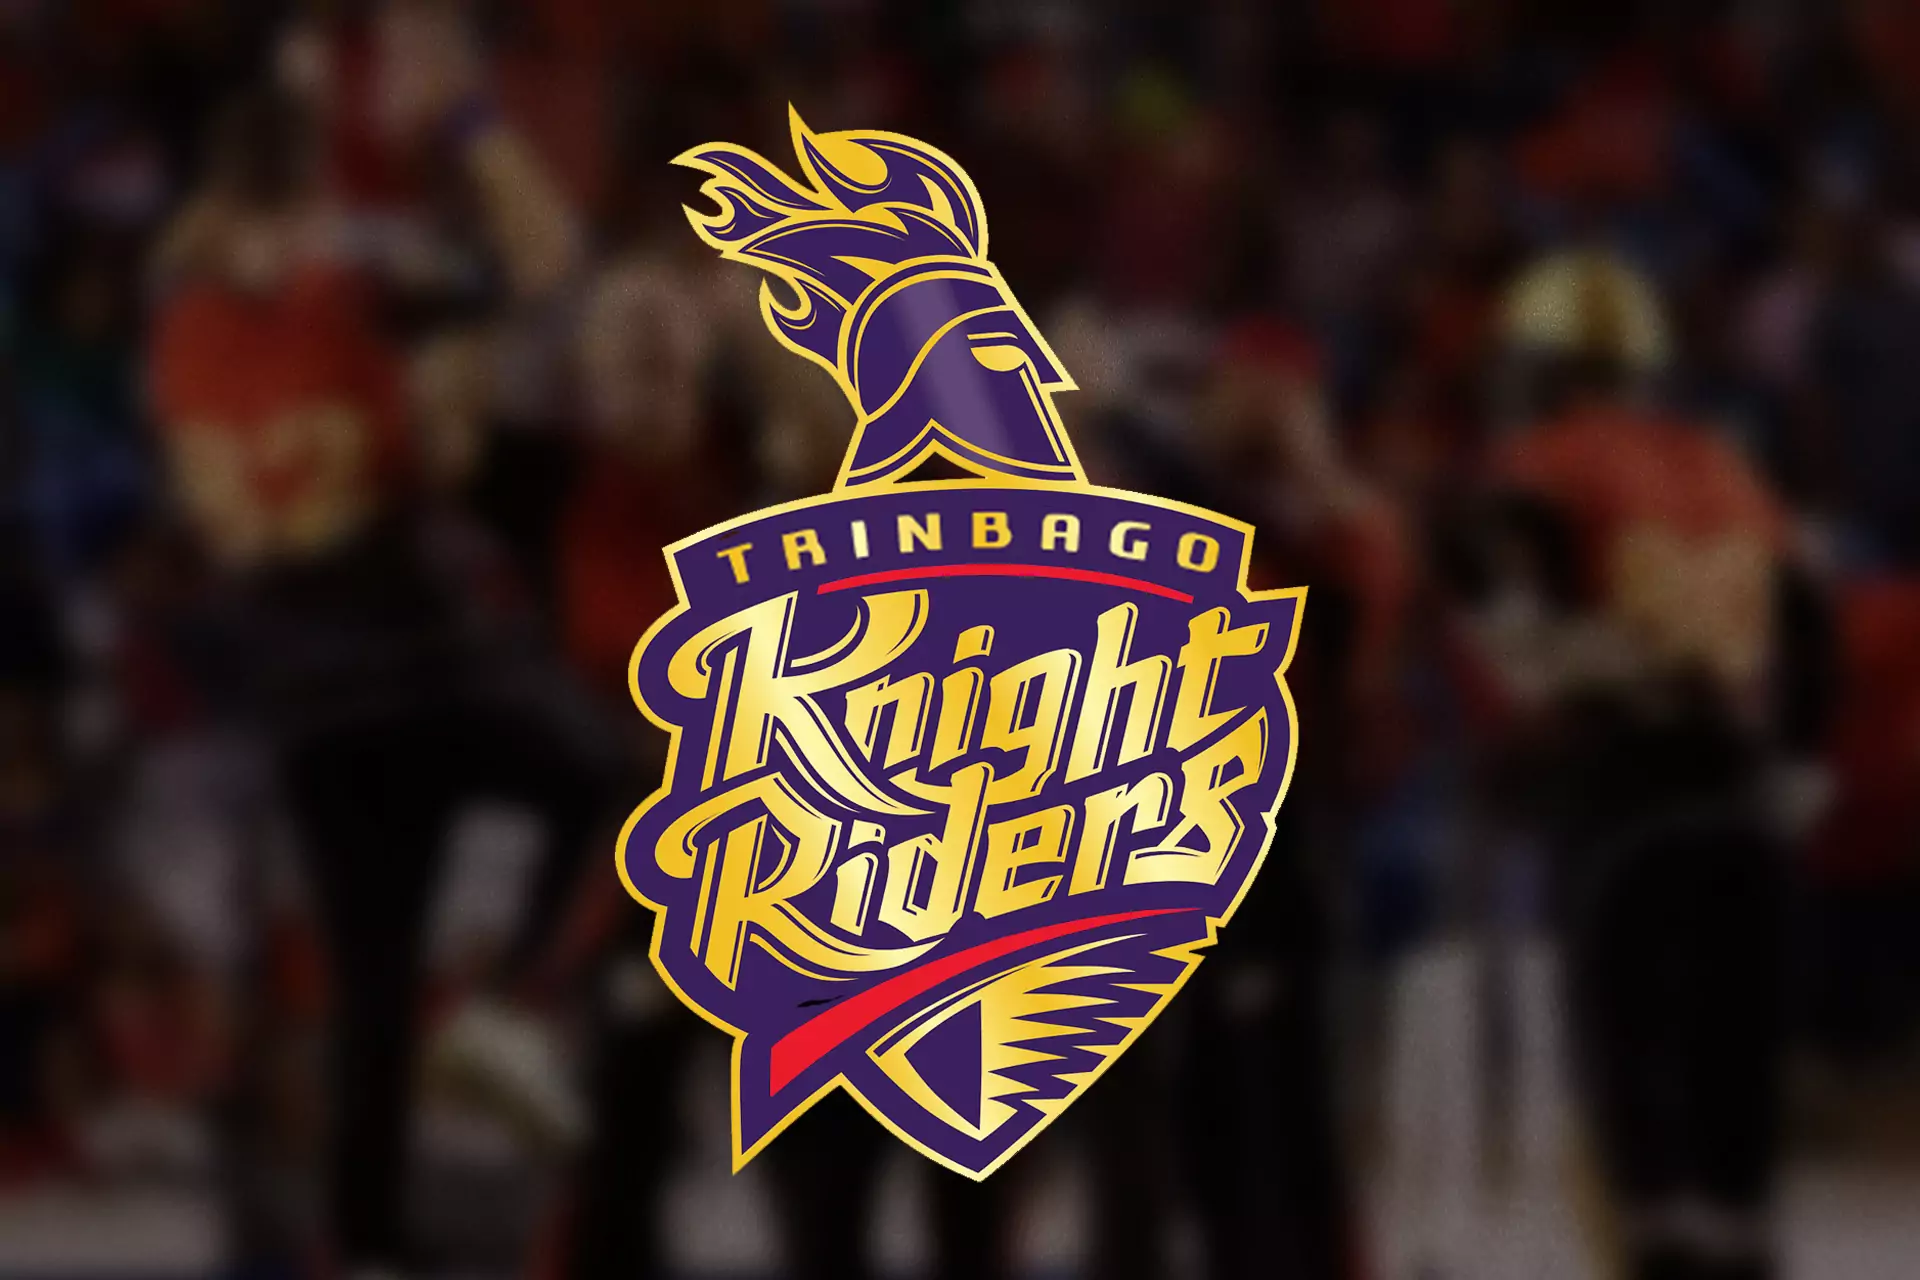 The Trinbago Knight Riders team is one of the first teams to join the CPL.